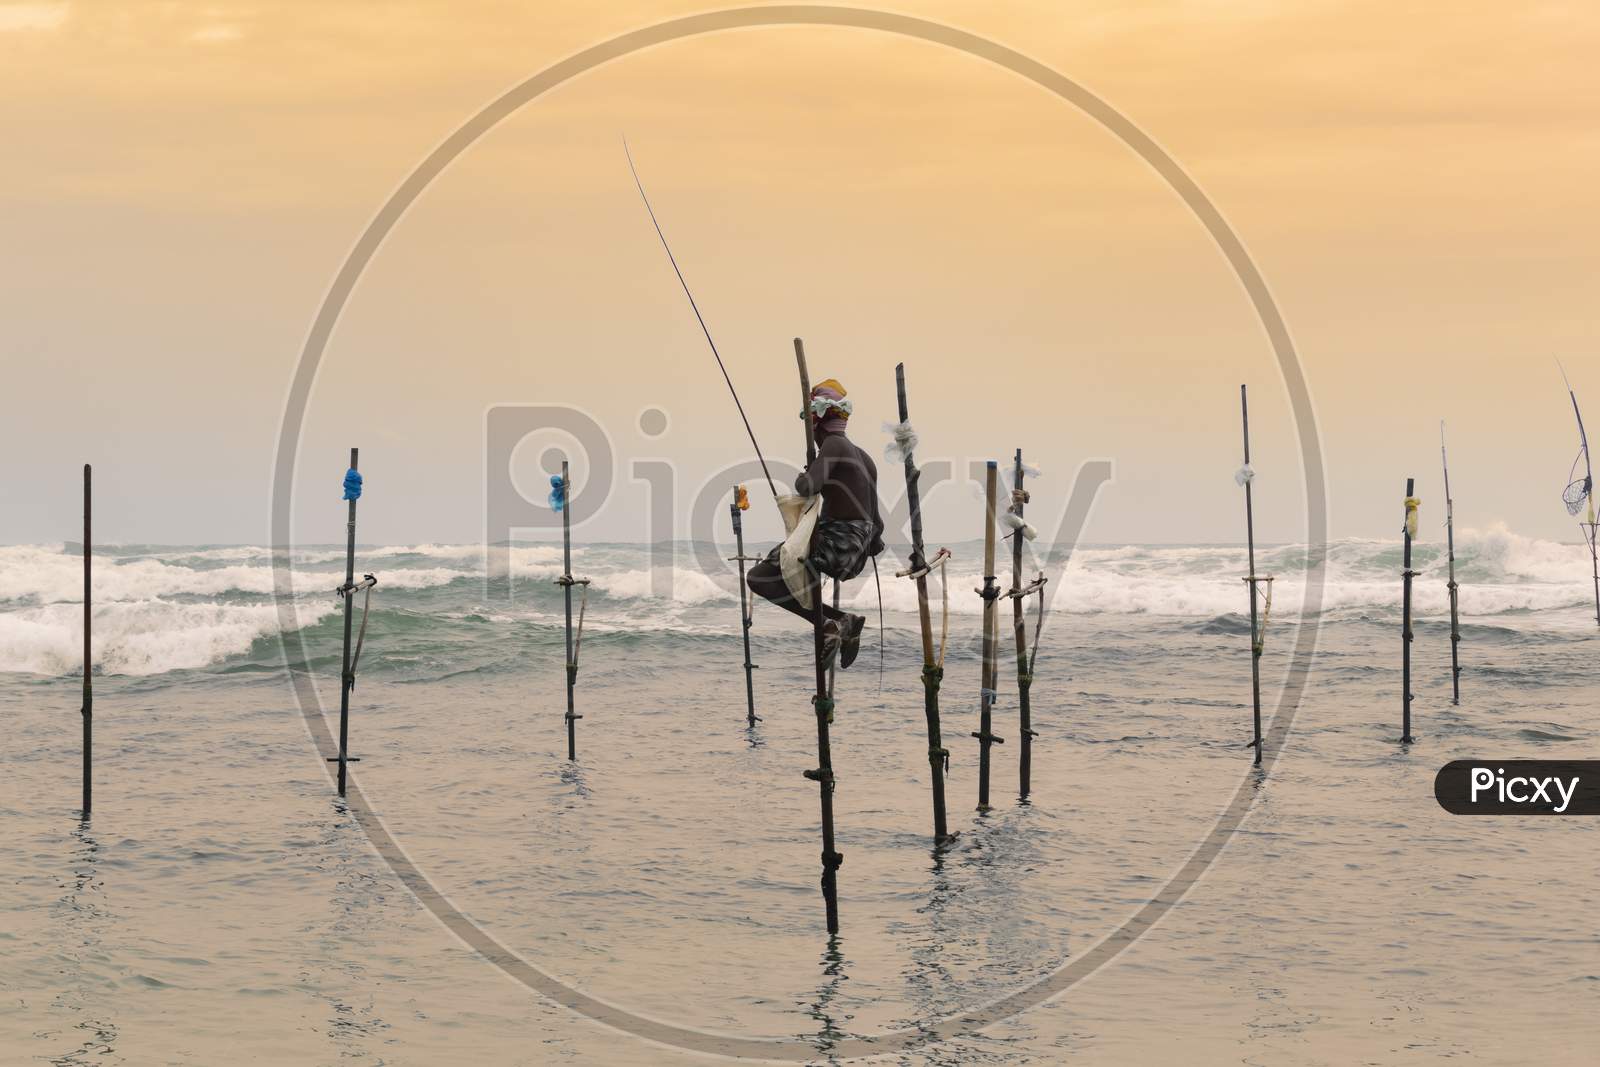 Stilt Fisherman Sitting In His Pole With A Wooden Fishing Rod In His Hands In The Sunset Evening. Ocean Waves Crash Behind Him In The Background.